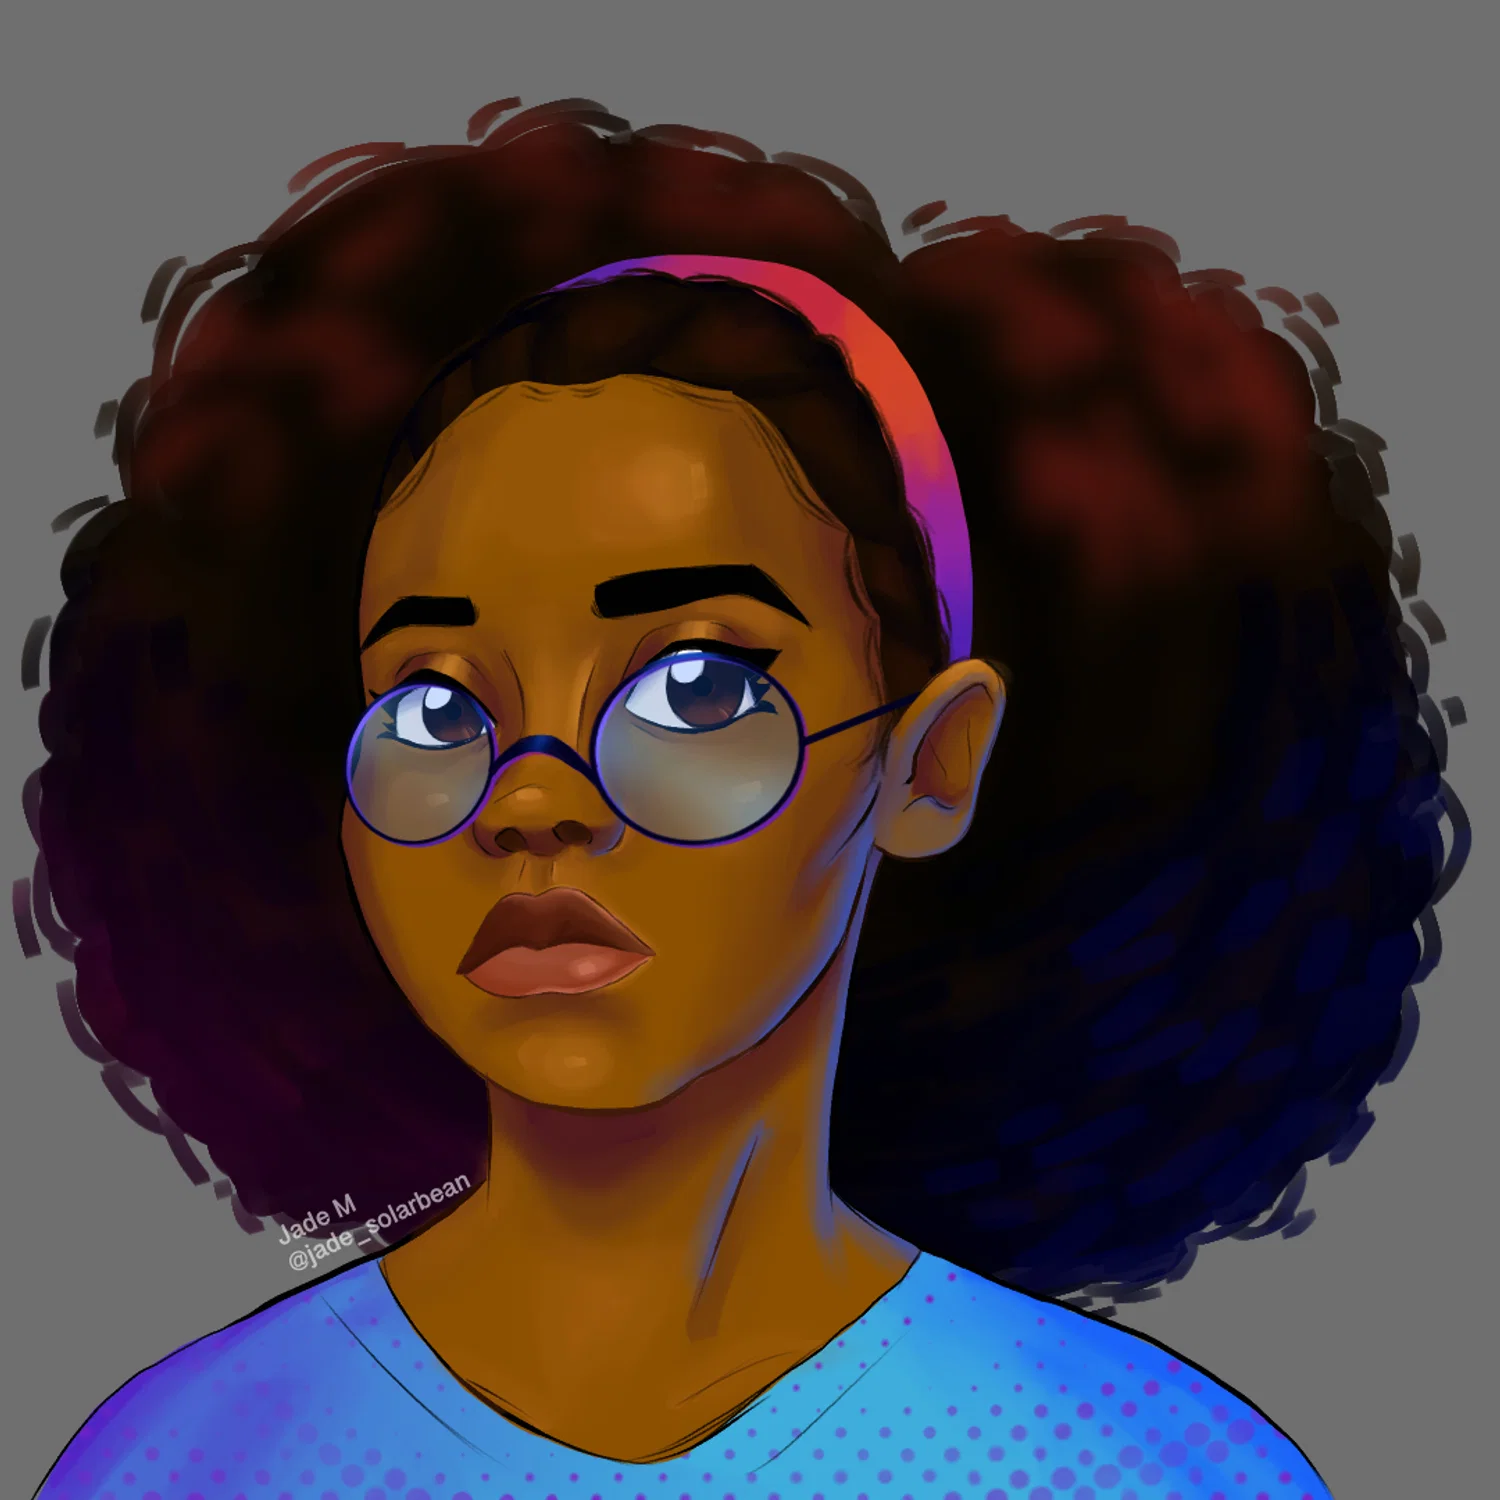 A self portrait of me with big fluffy hair and wearing glasses.